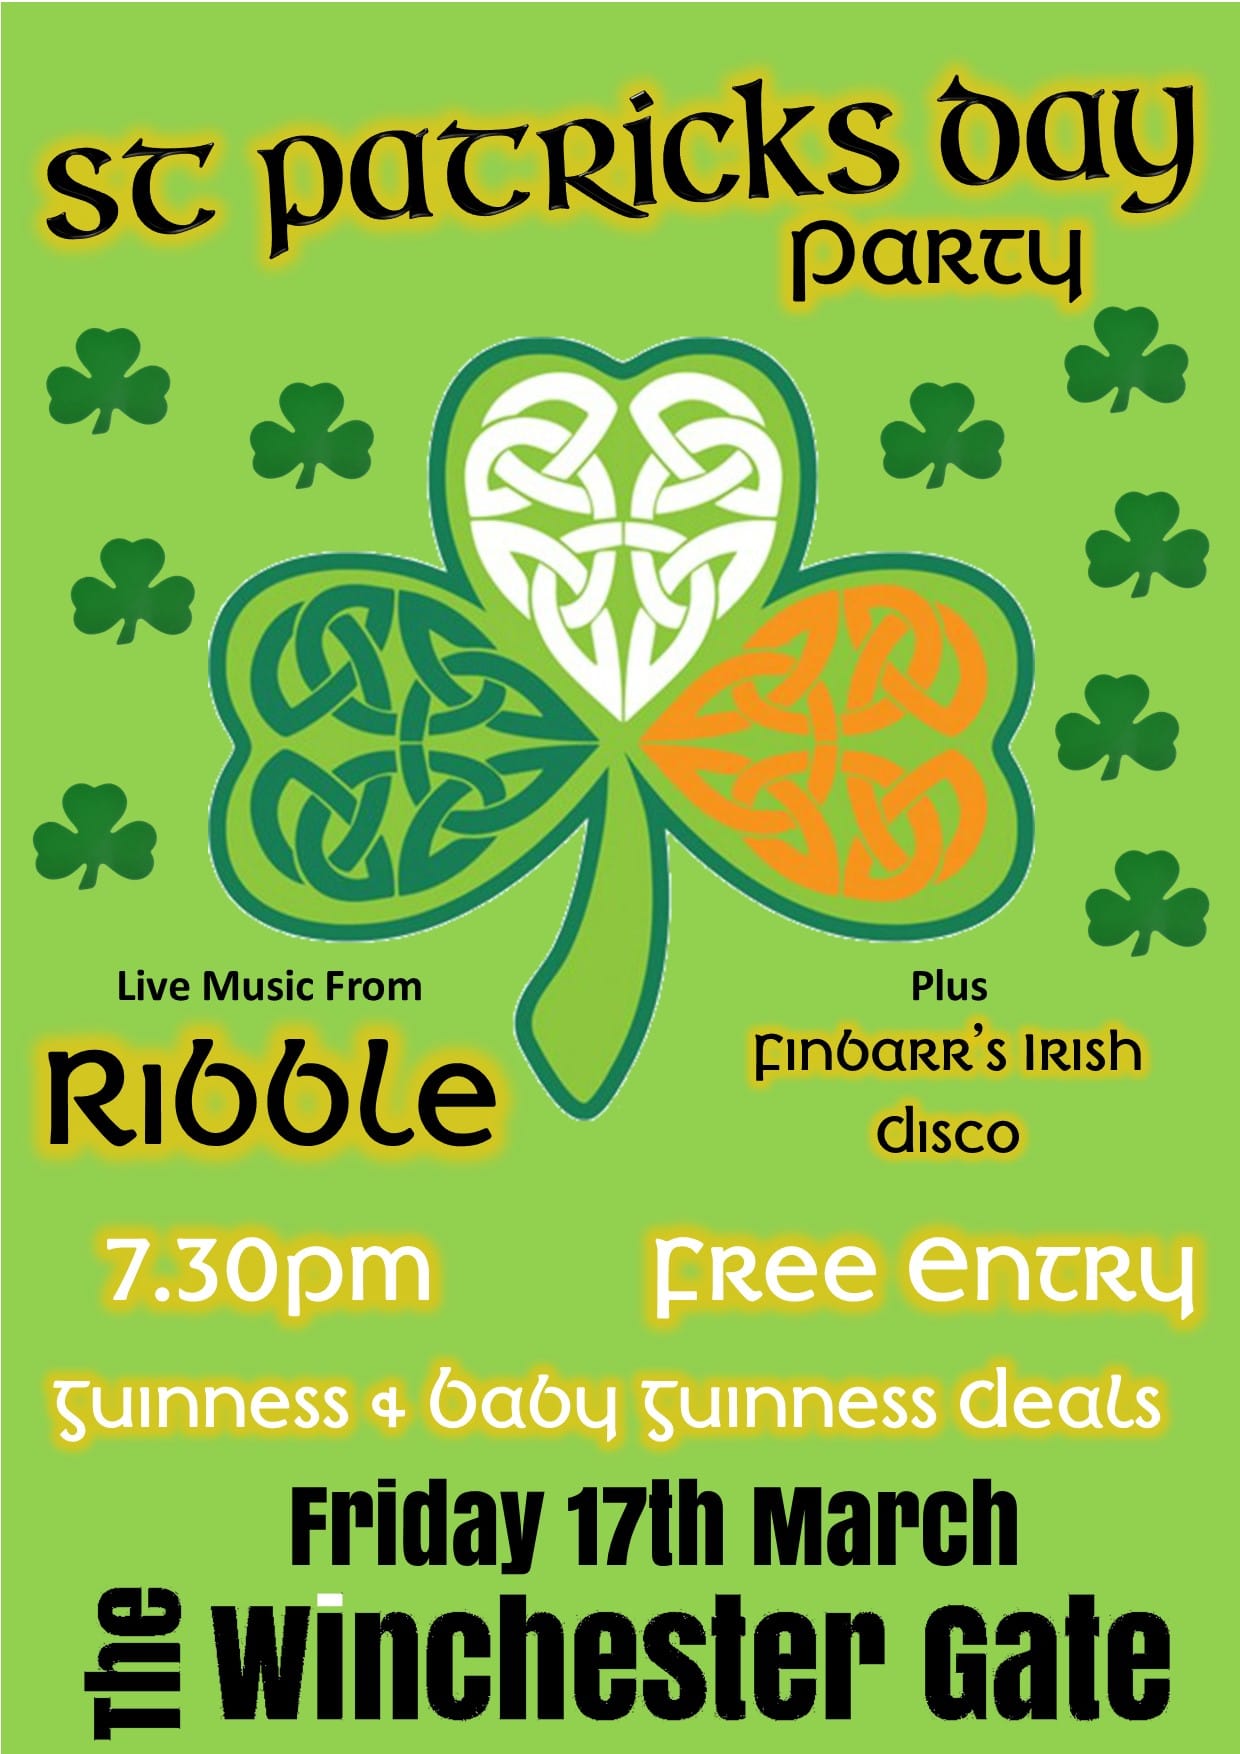 St Patricks Day Party: RIBBLE